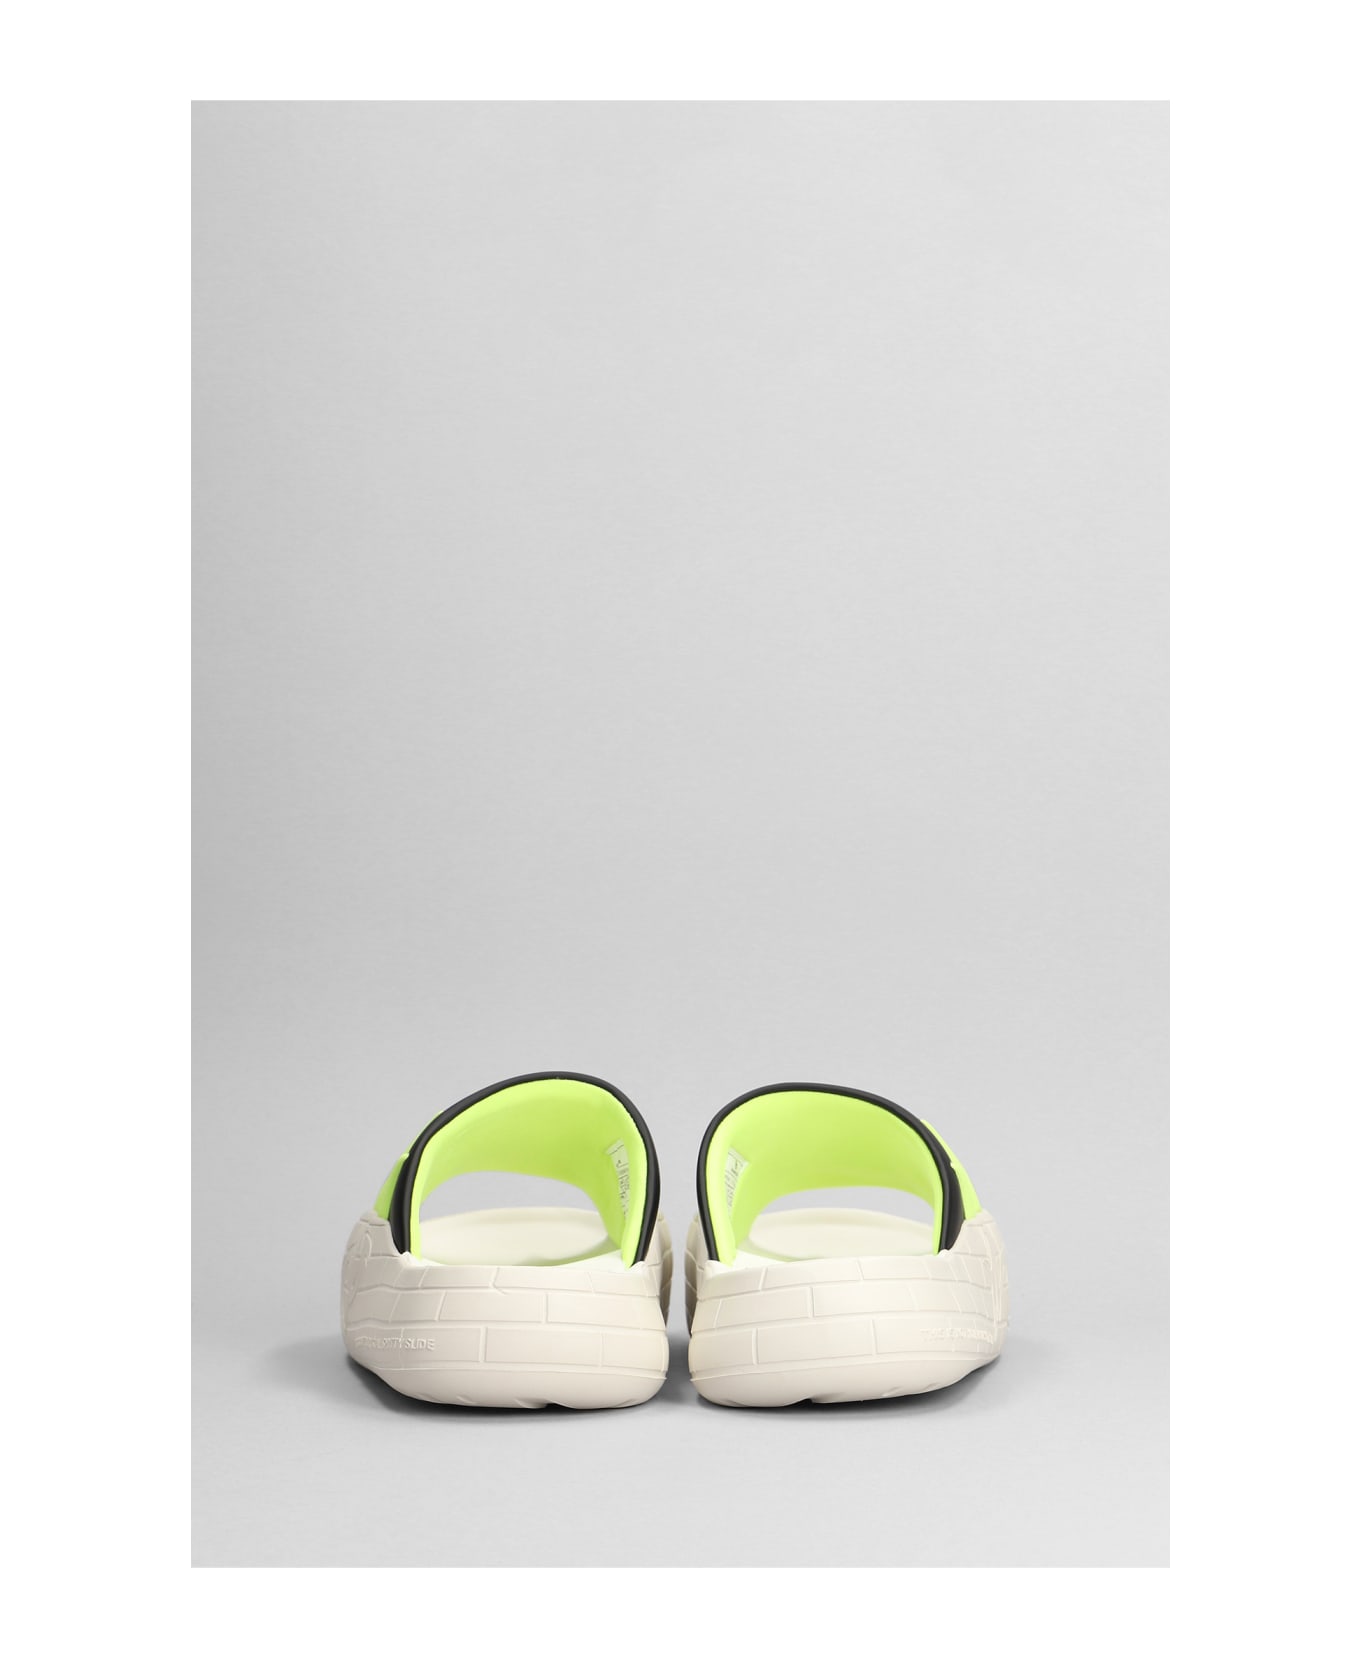 Acupuncture Nyu Slide Flats In Green Rubber/plasic - green その他各種シューズ